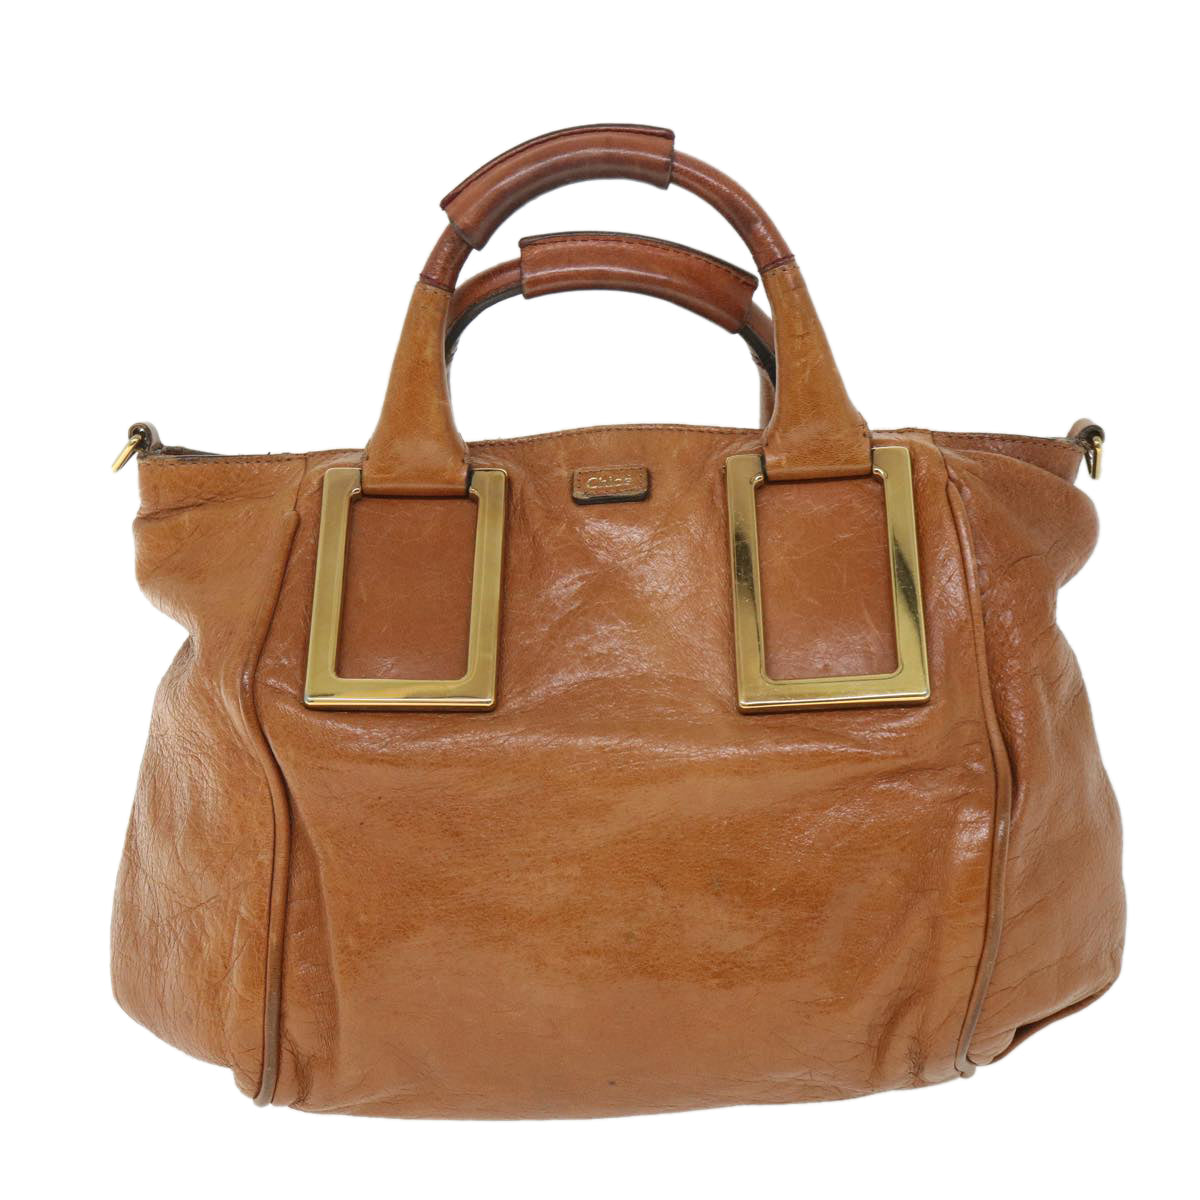 Chloe Etel Hand Bag Leather 2way Brown 03-10-50 Auth th4093 - 0